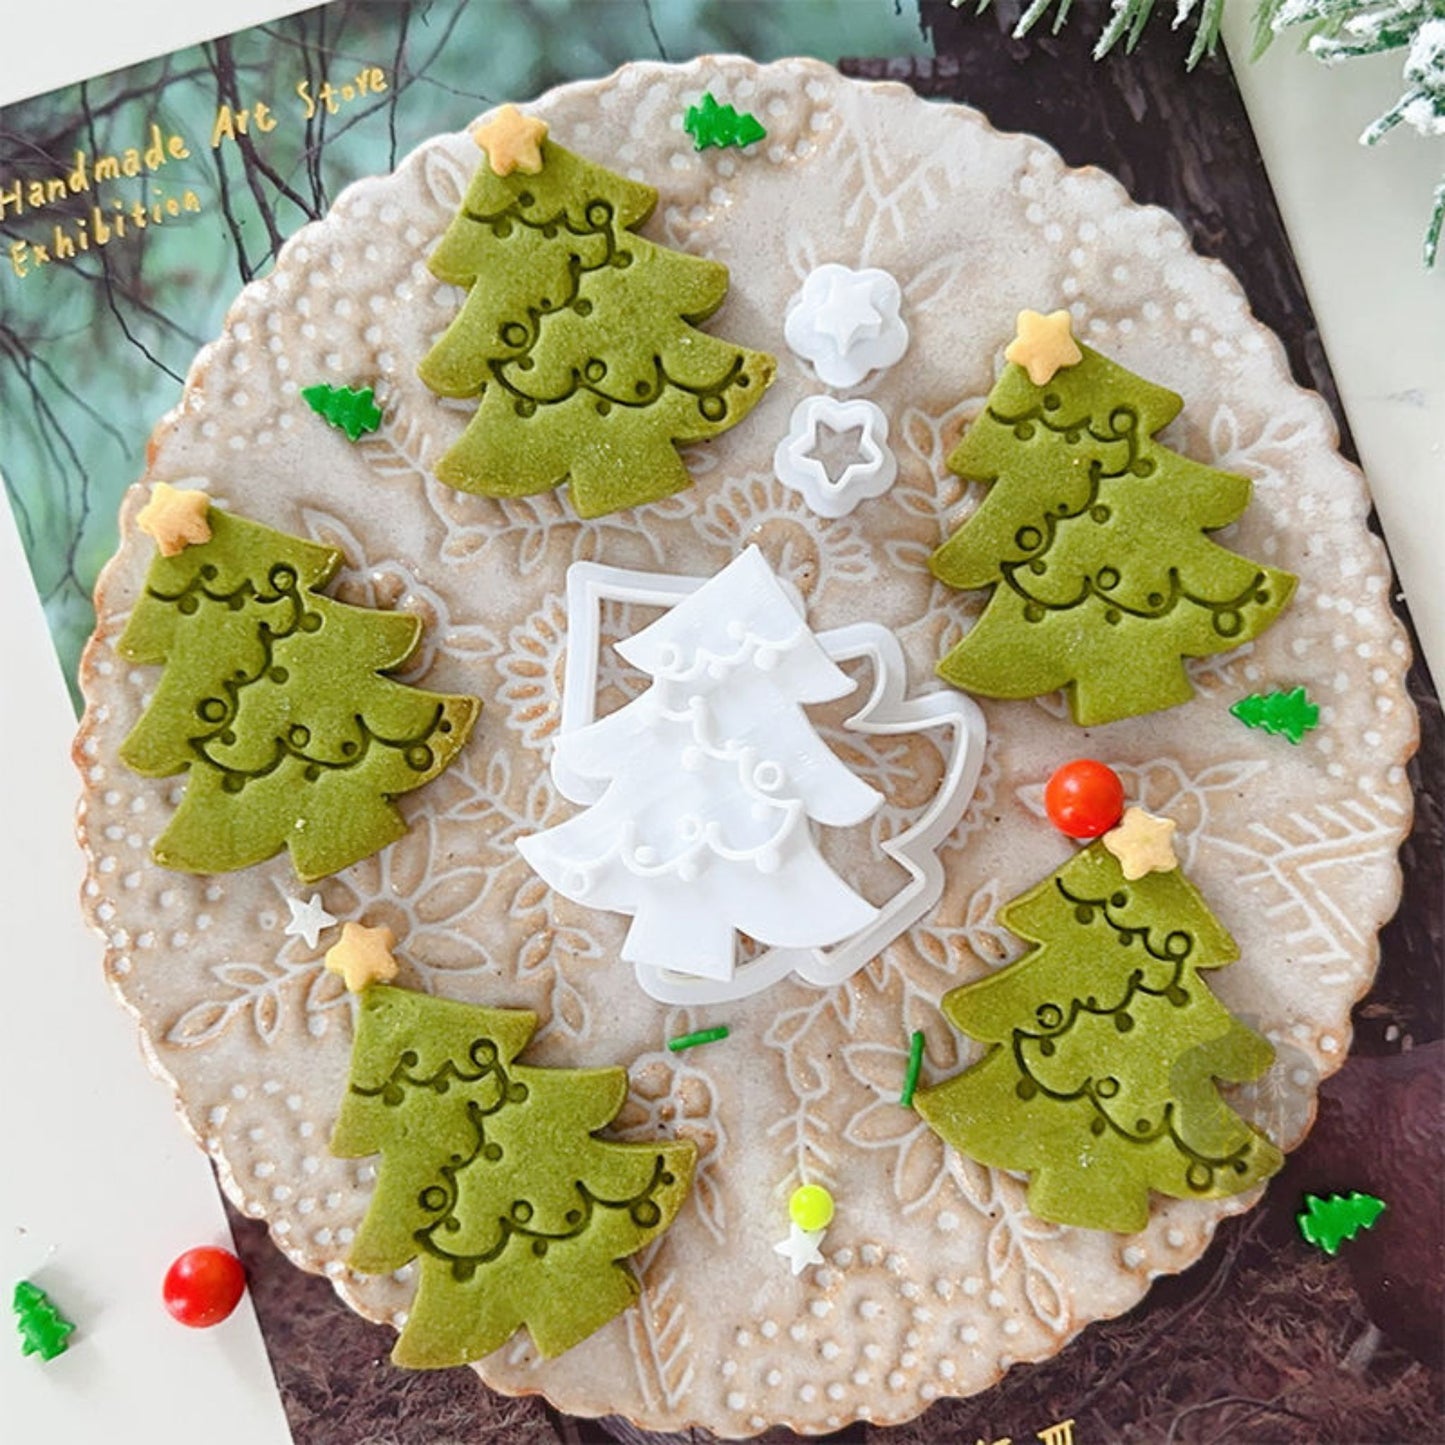 Christmas Tree Cookie Mold, Bake Perfect Cookies for the Holidays